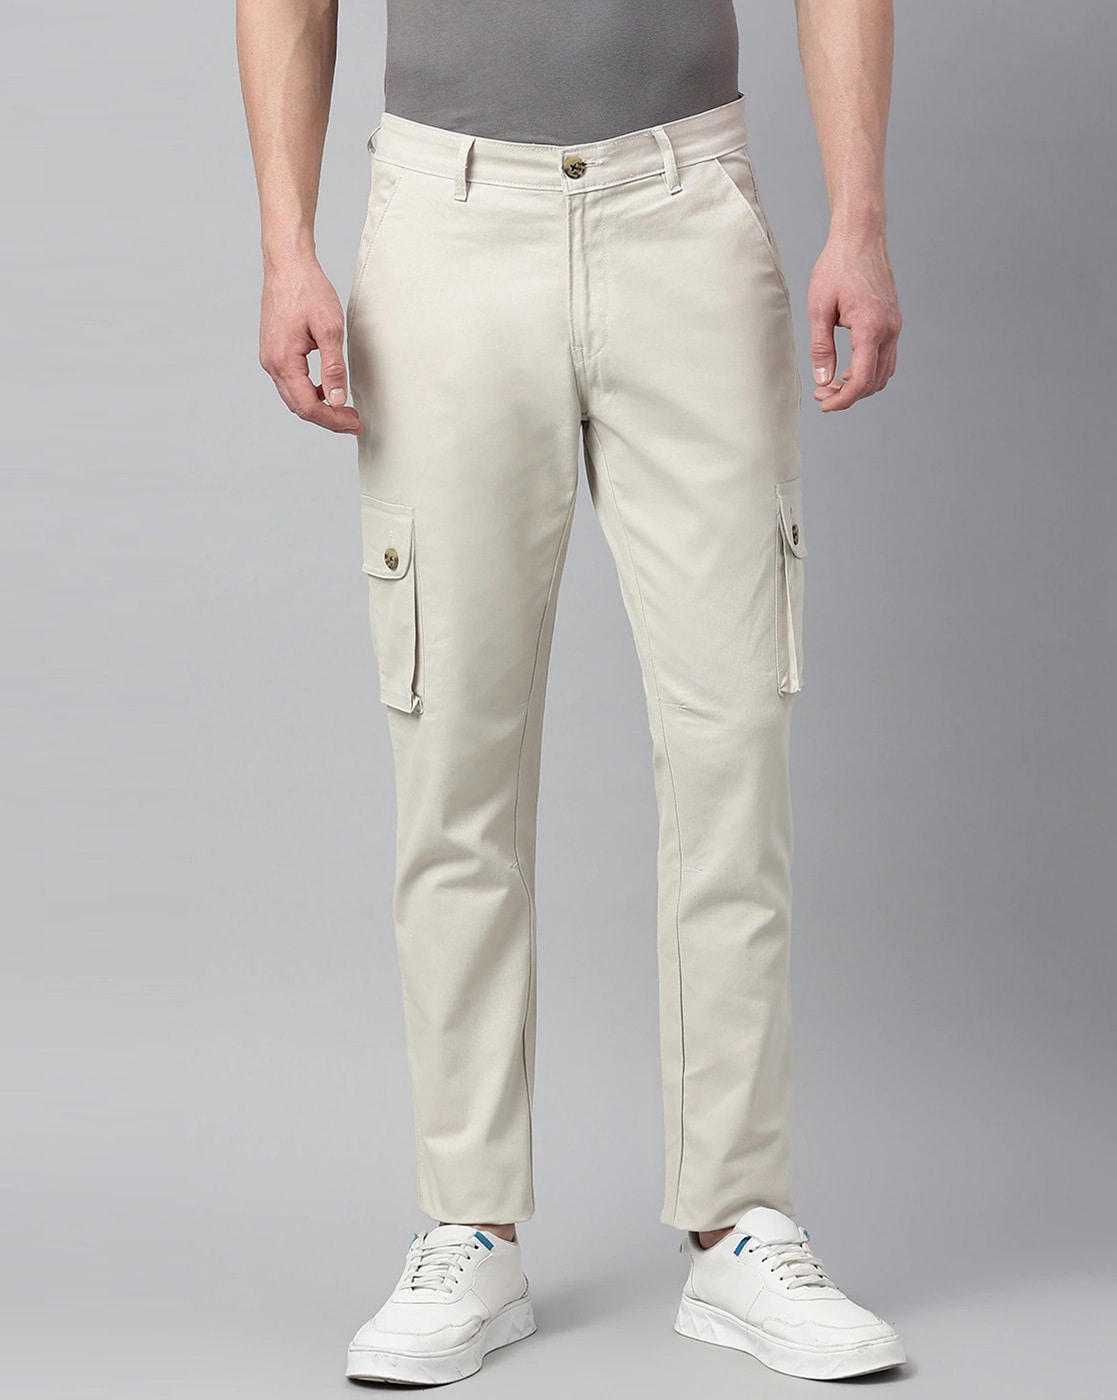 Mens Cargo Grey Trouser in Valsad at best price by K J Corporation -  Justdial